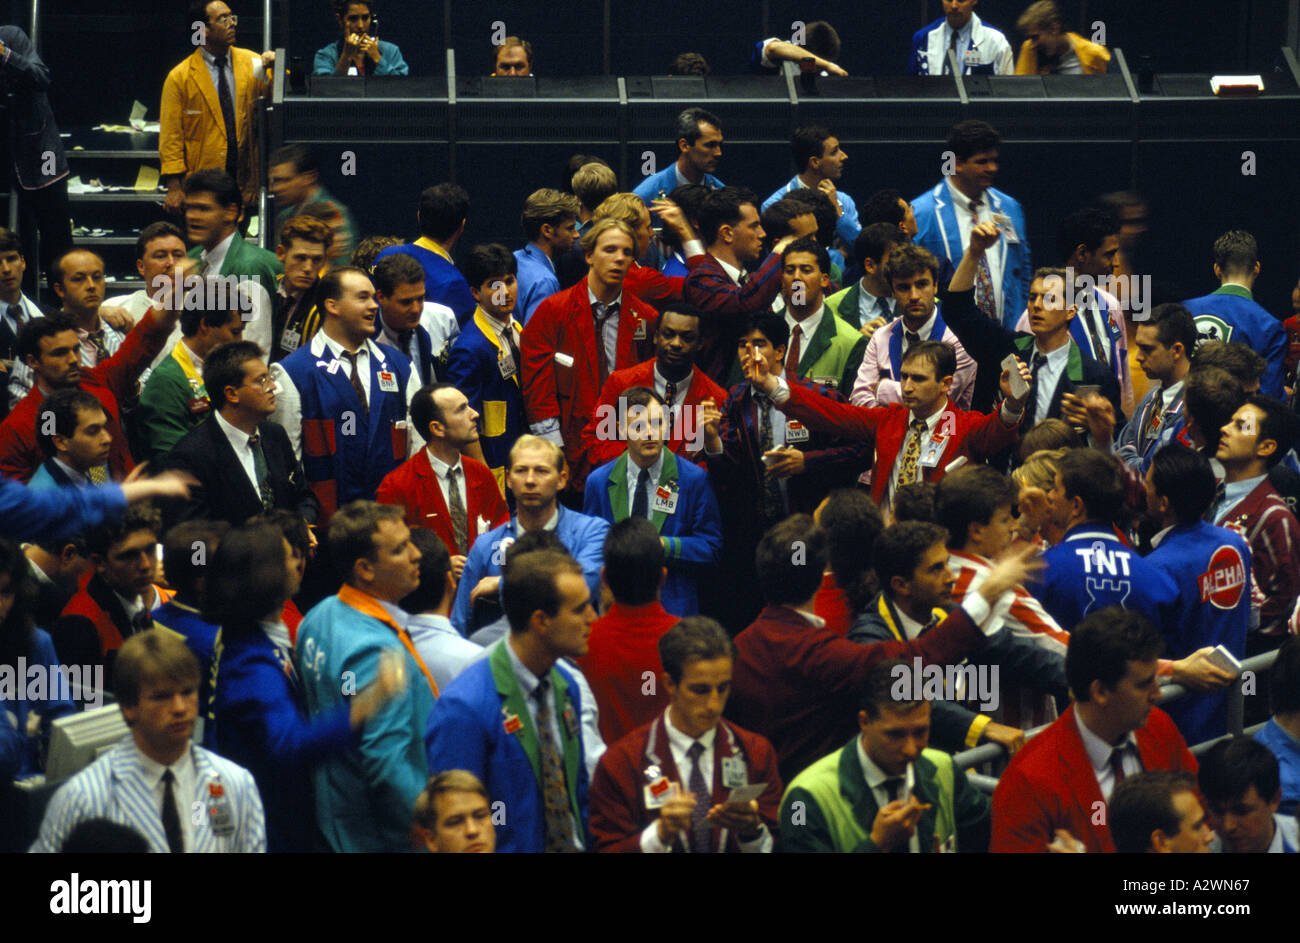 Traders on the Liffe trading floor at the London Stock  Exchange, wearing jackets of different colours. Stock Photo